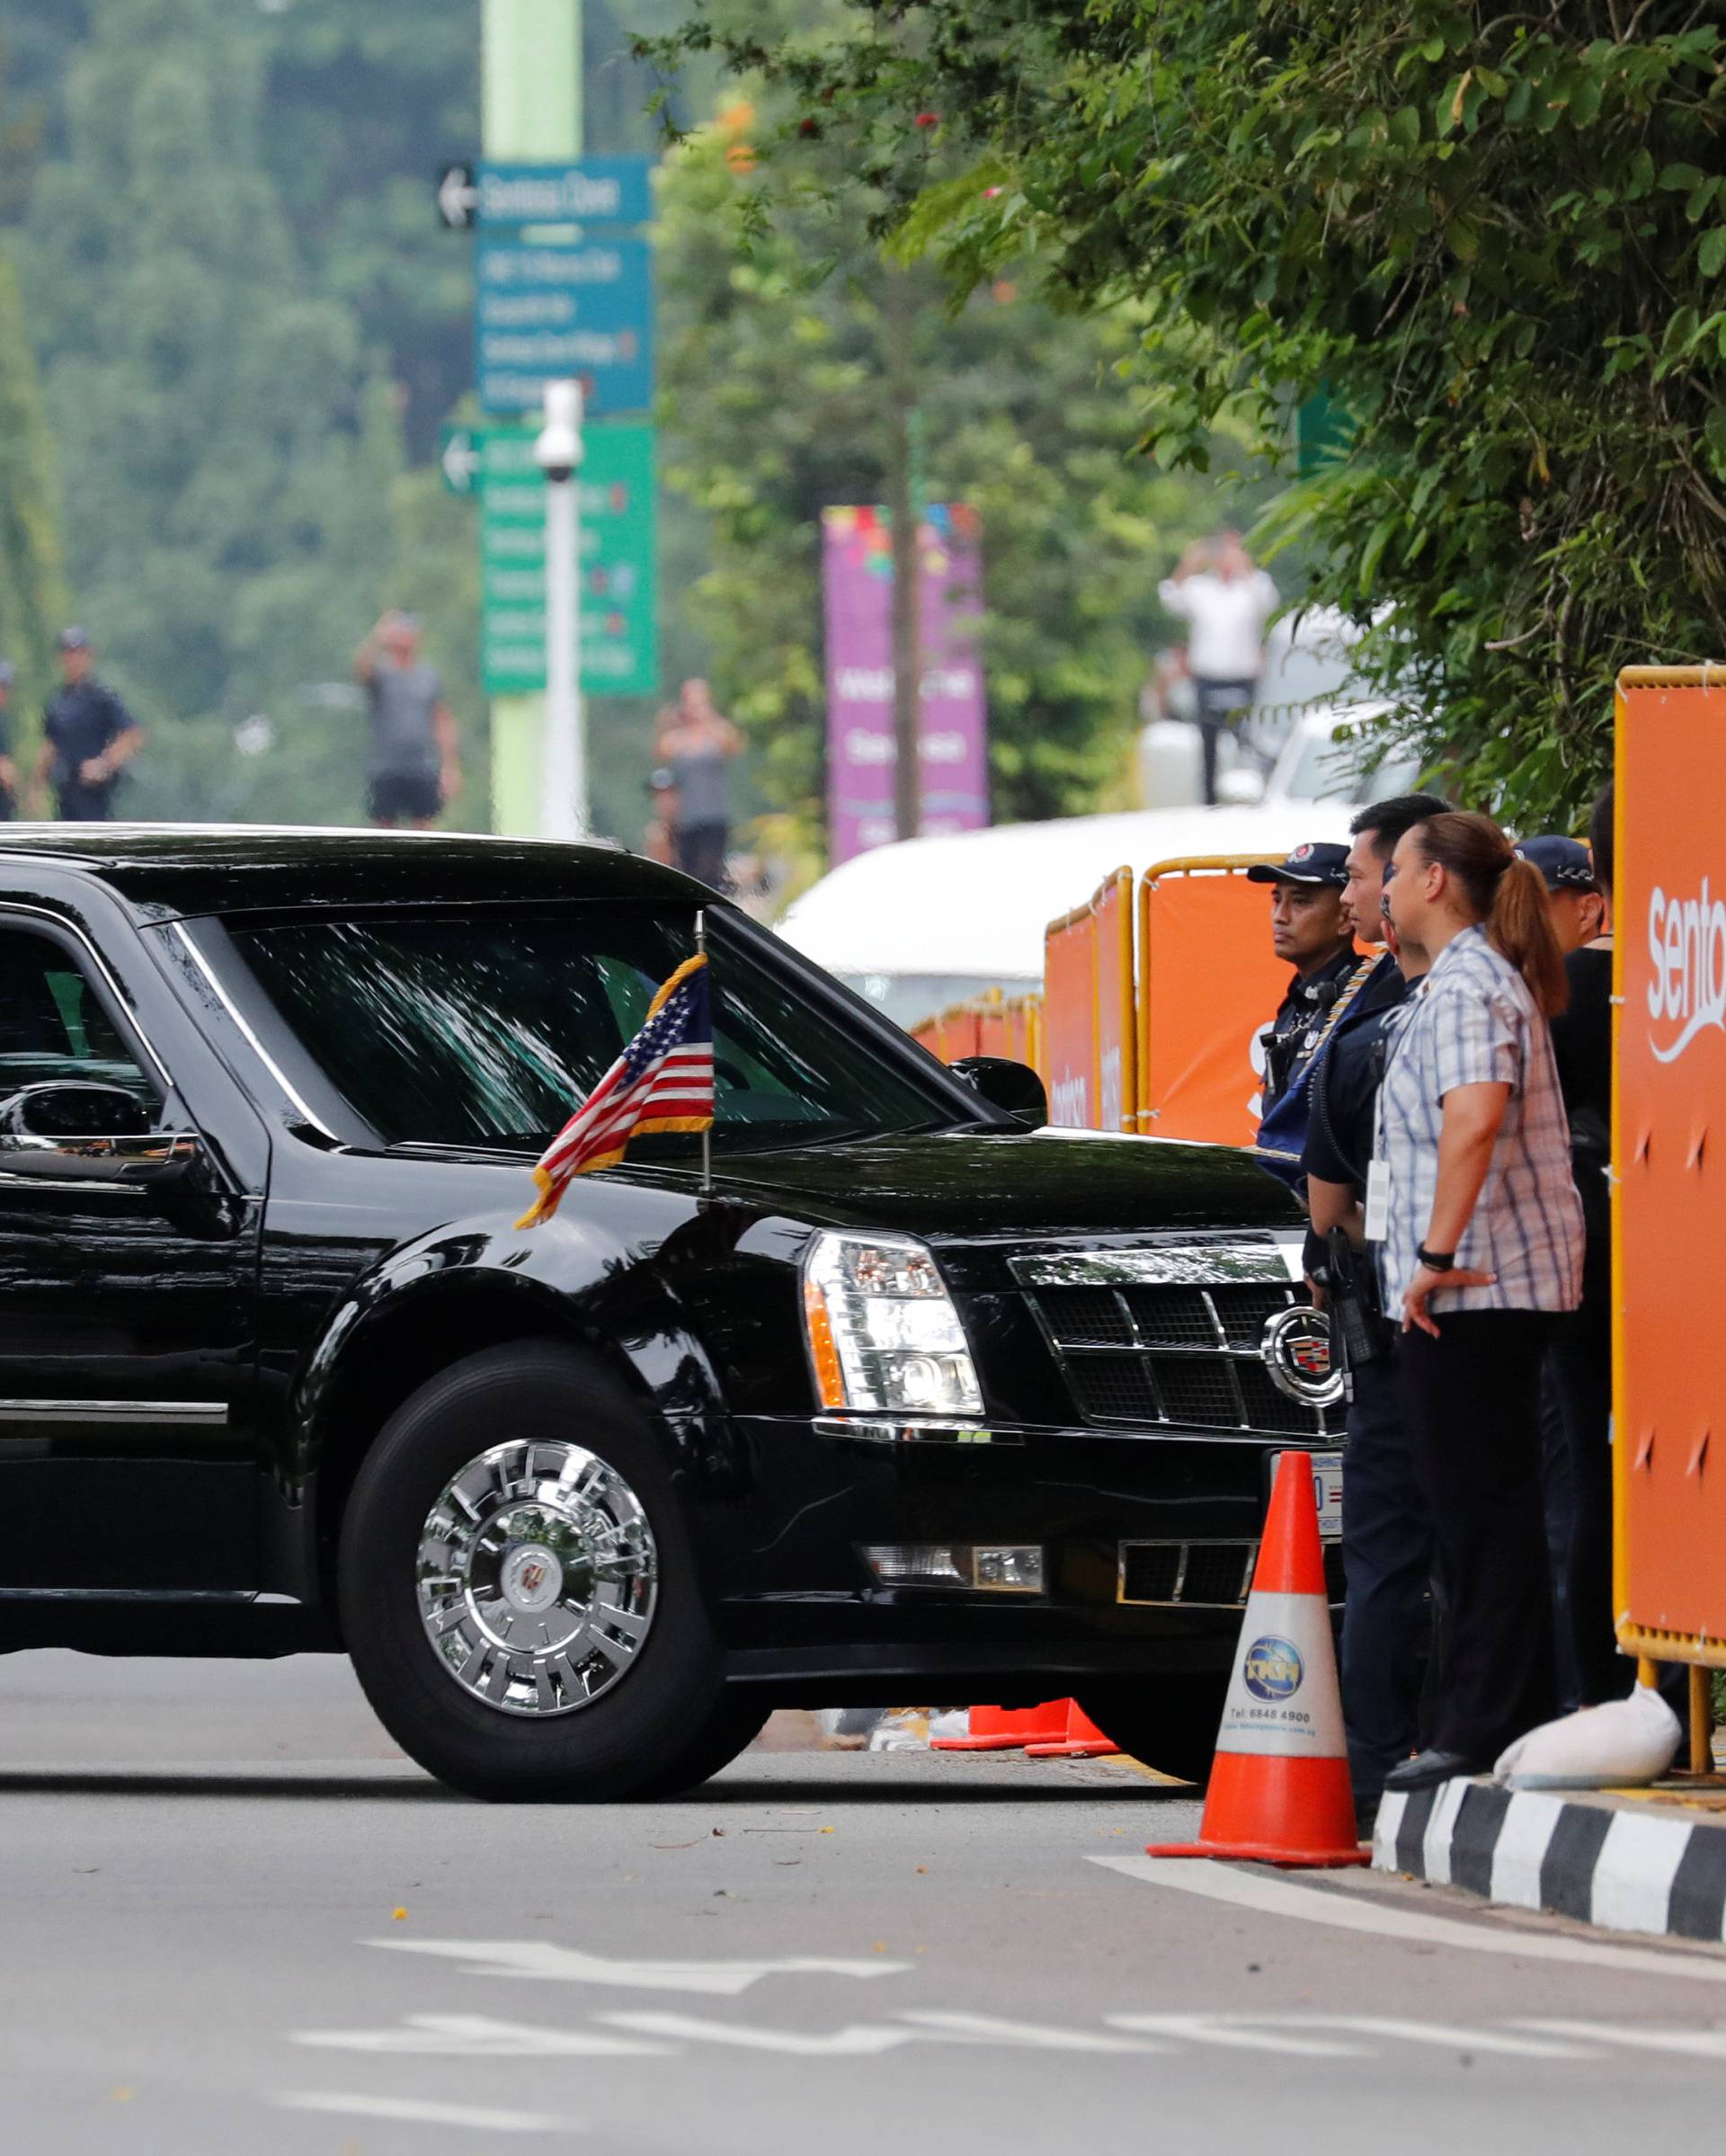 The motorcade of U.S. President Donald Trump arrives at the Capella hotel, the venue of the summit between North Korea and the U.s., on Sentosa island in Singapore